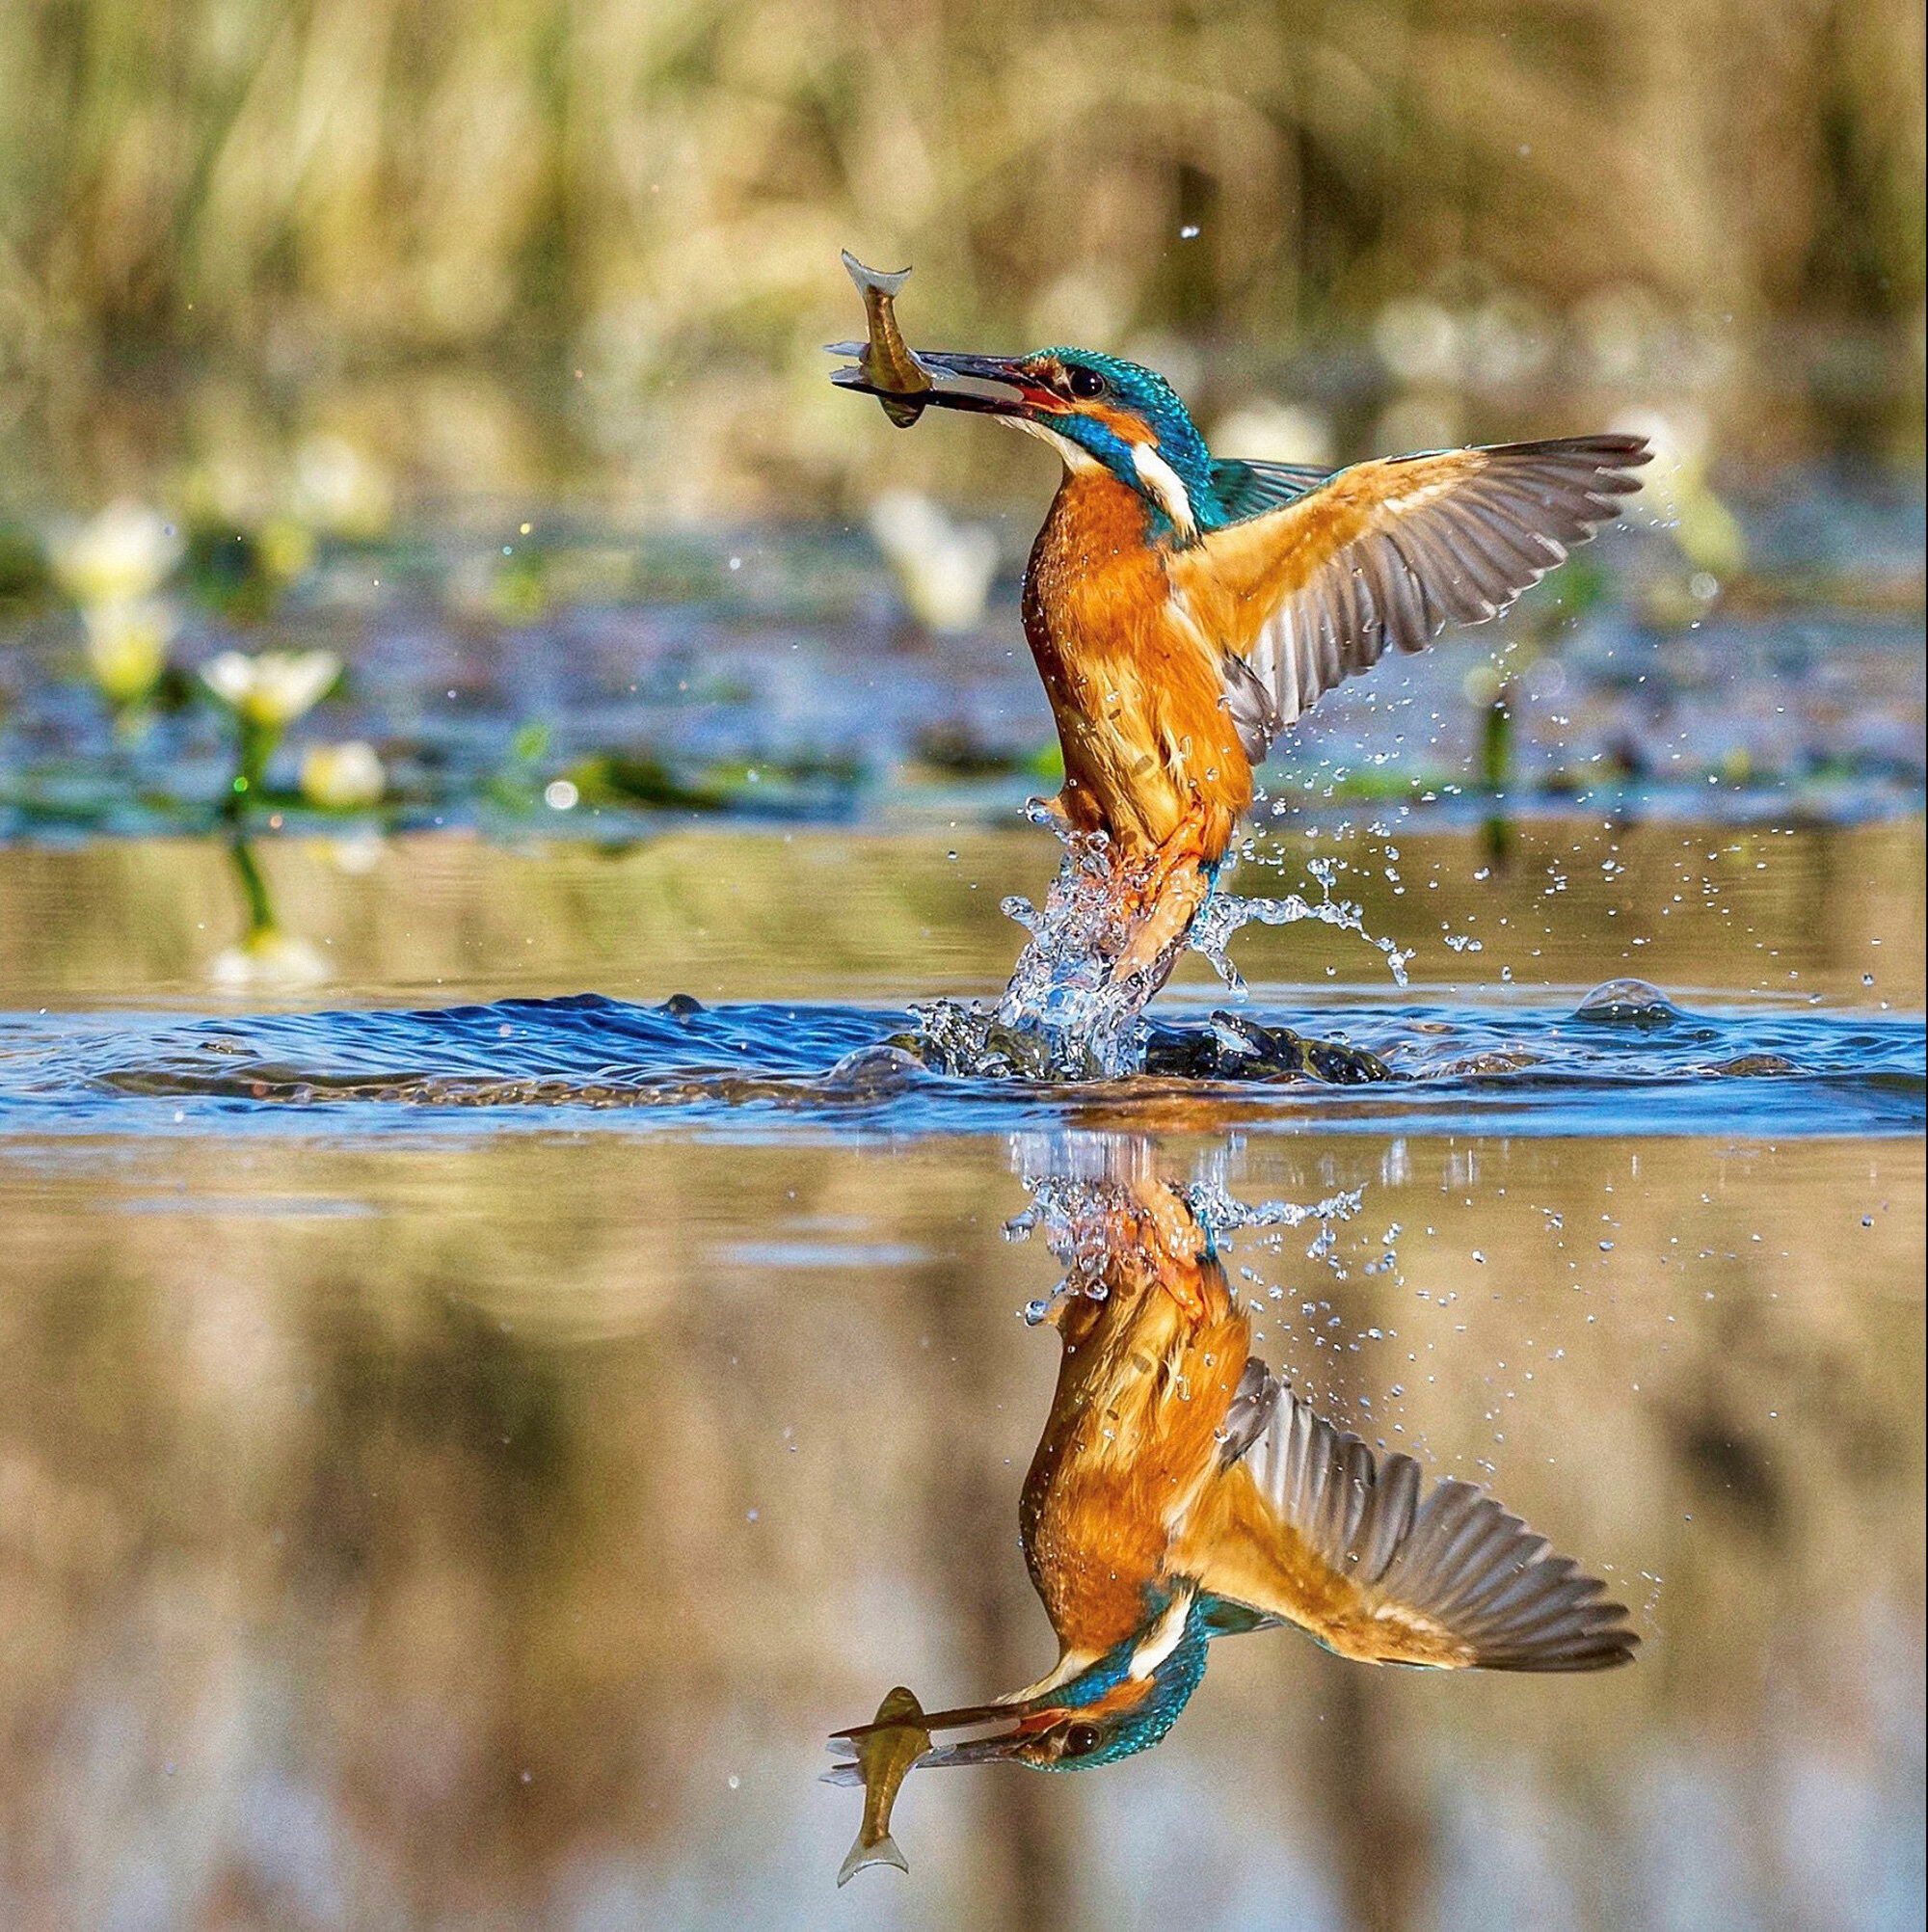 Kingfisher with a fish by Derek Lane